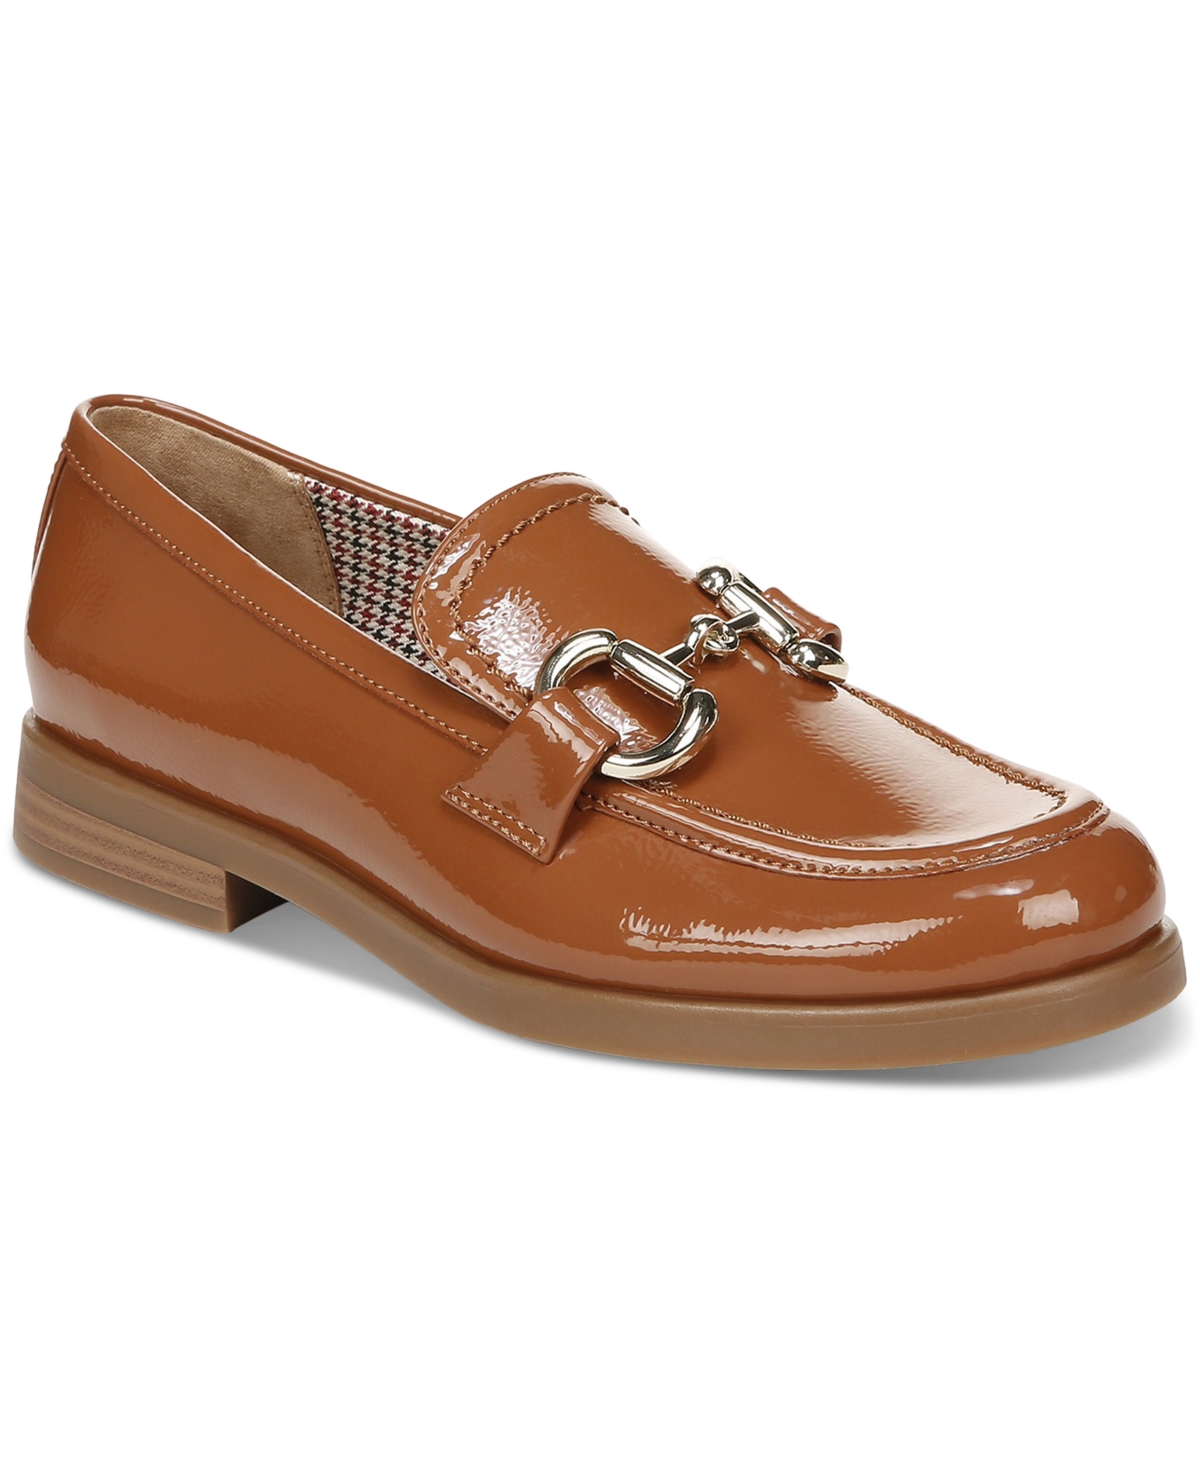 Women's Andreaa Slip-On Loafer Flats, Created for Macy's - Berry Patent